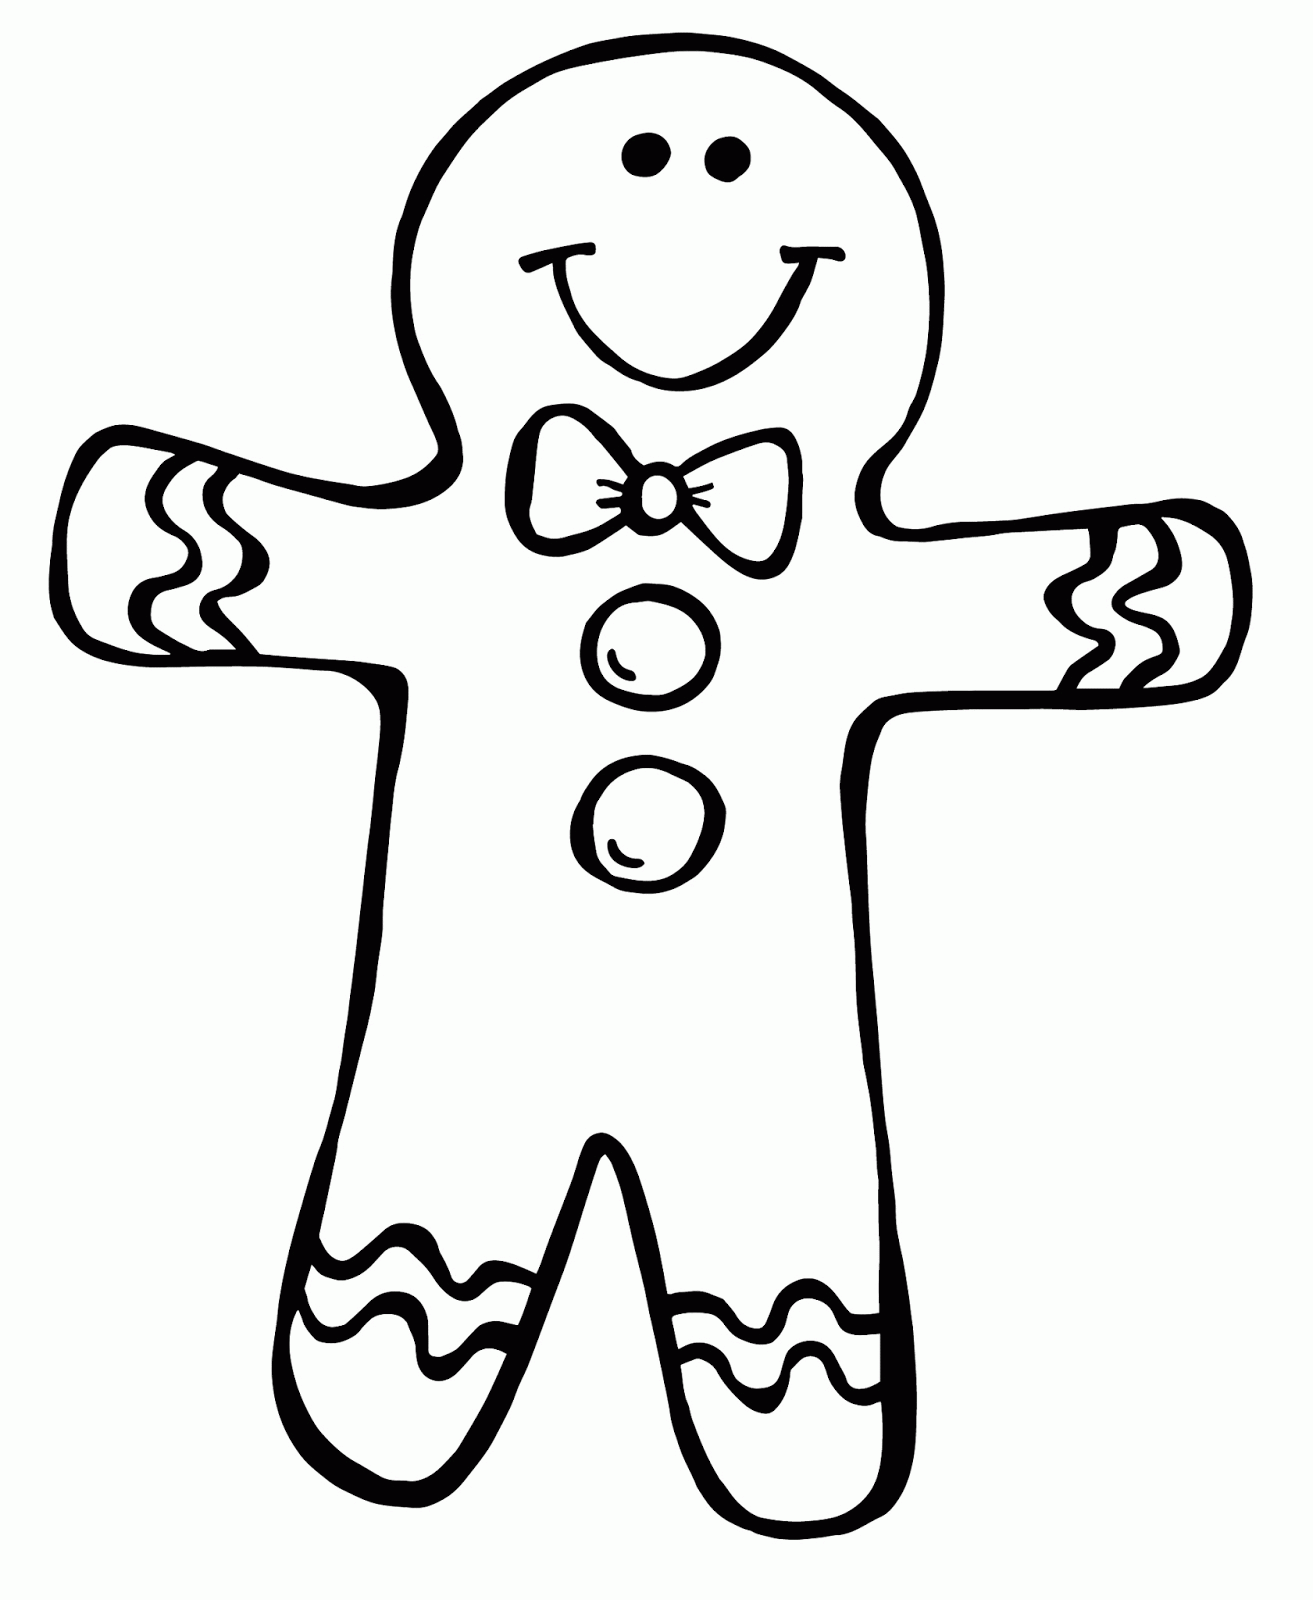 Gingerbread Boy And Girl Coloring Pages - HiColoringPages